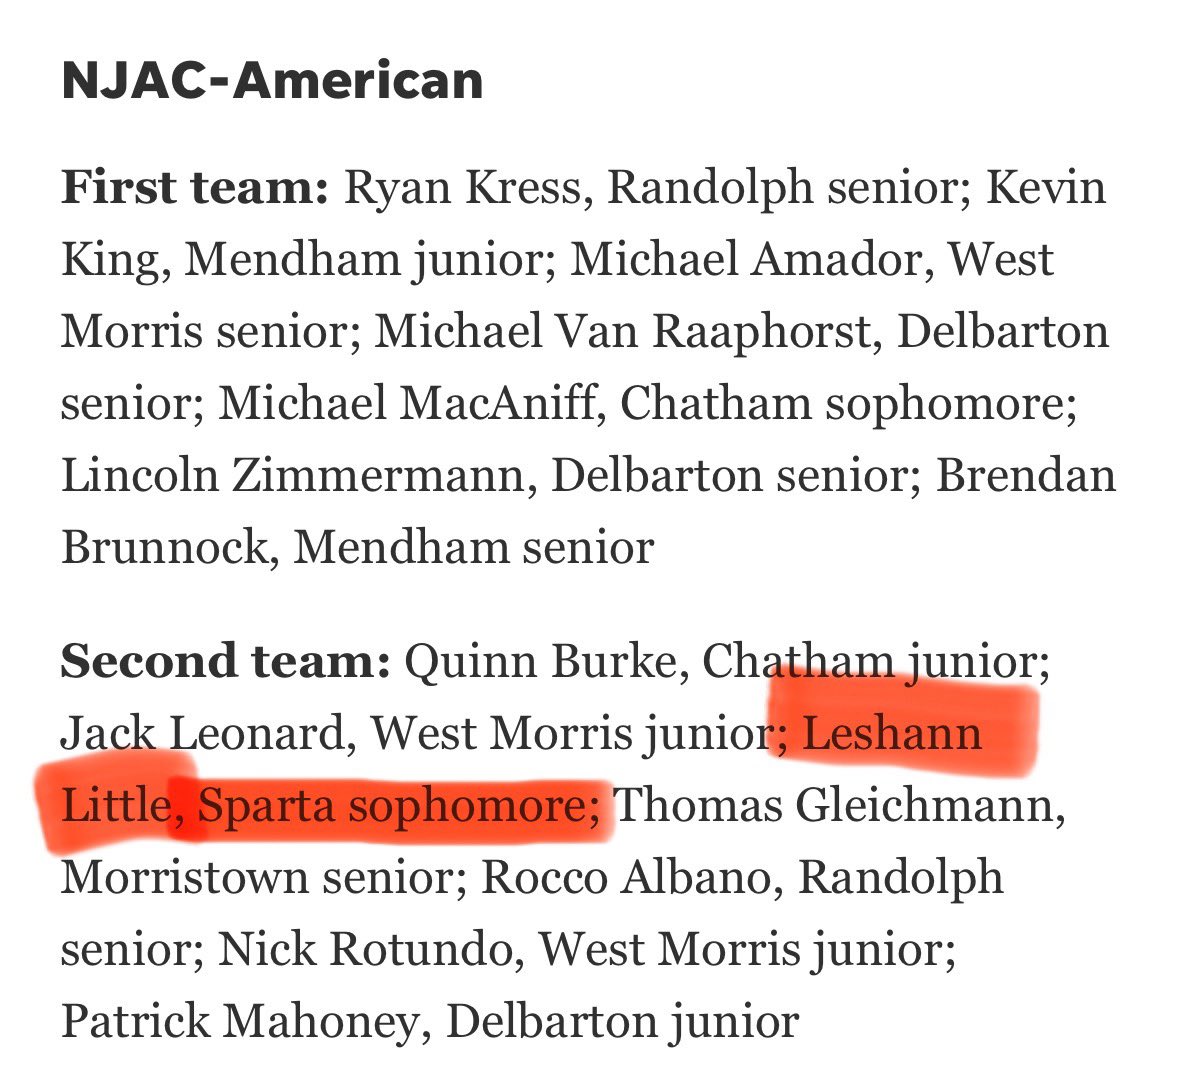 Thank you NJAC - American for the second team nomination.